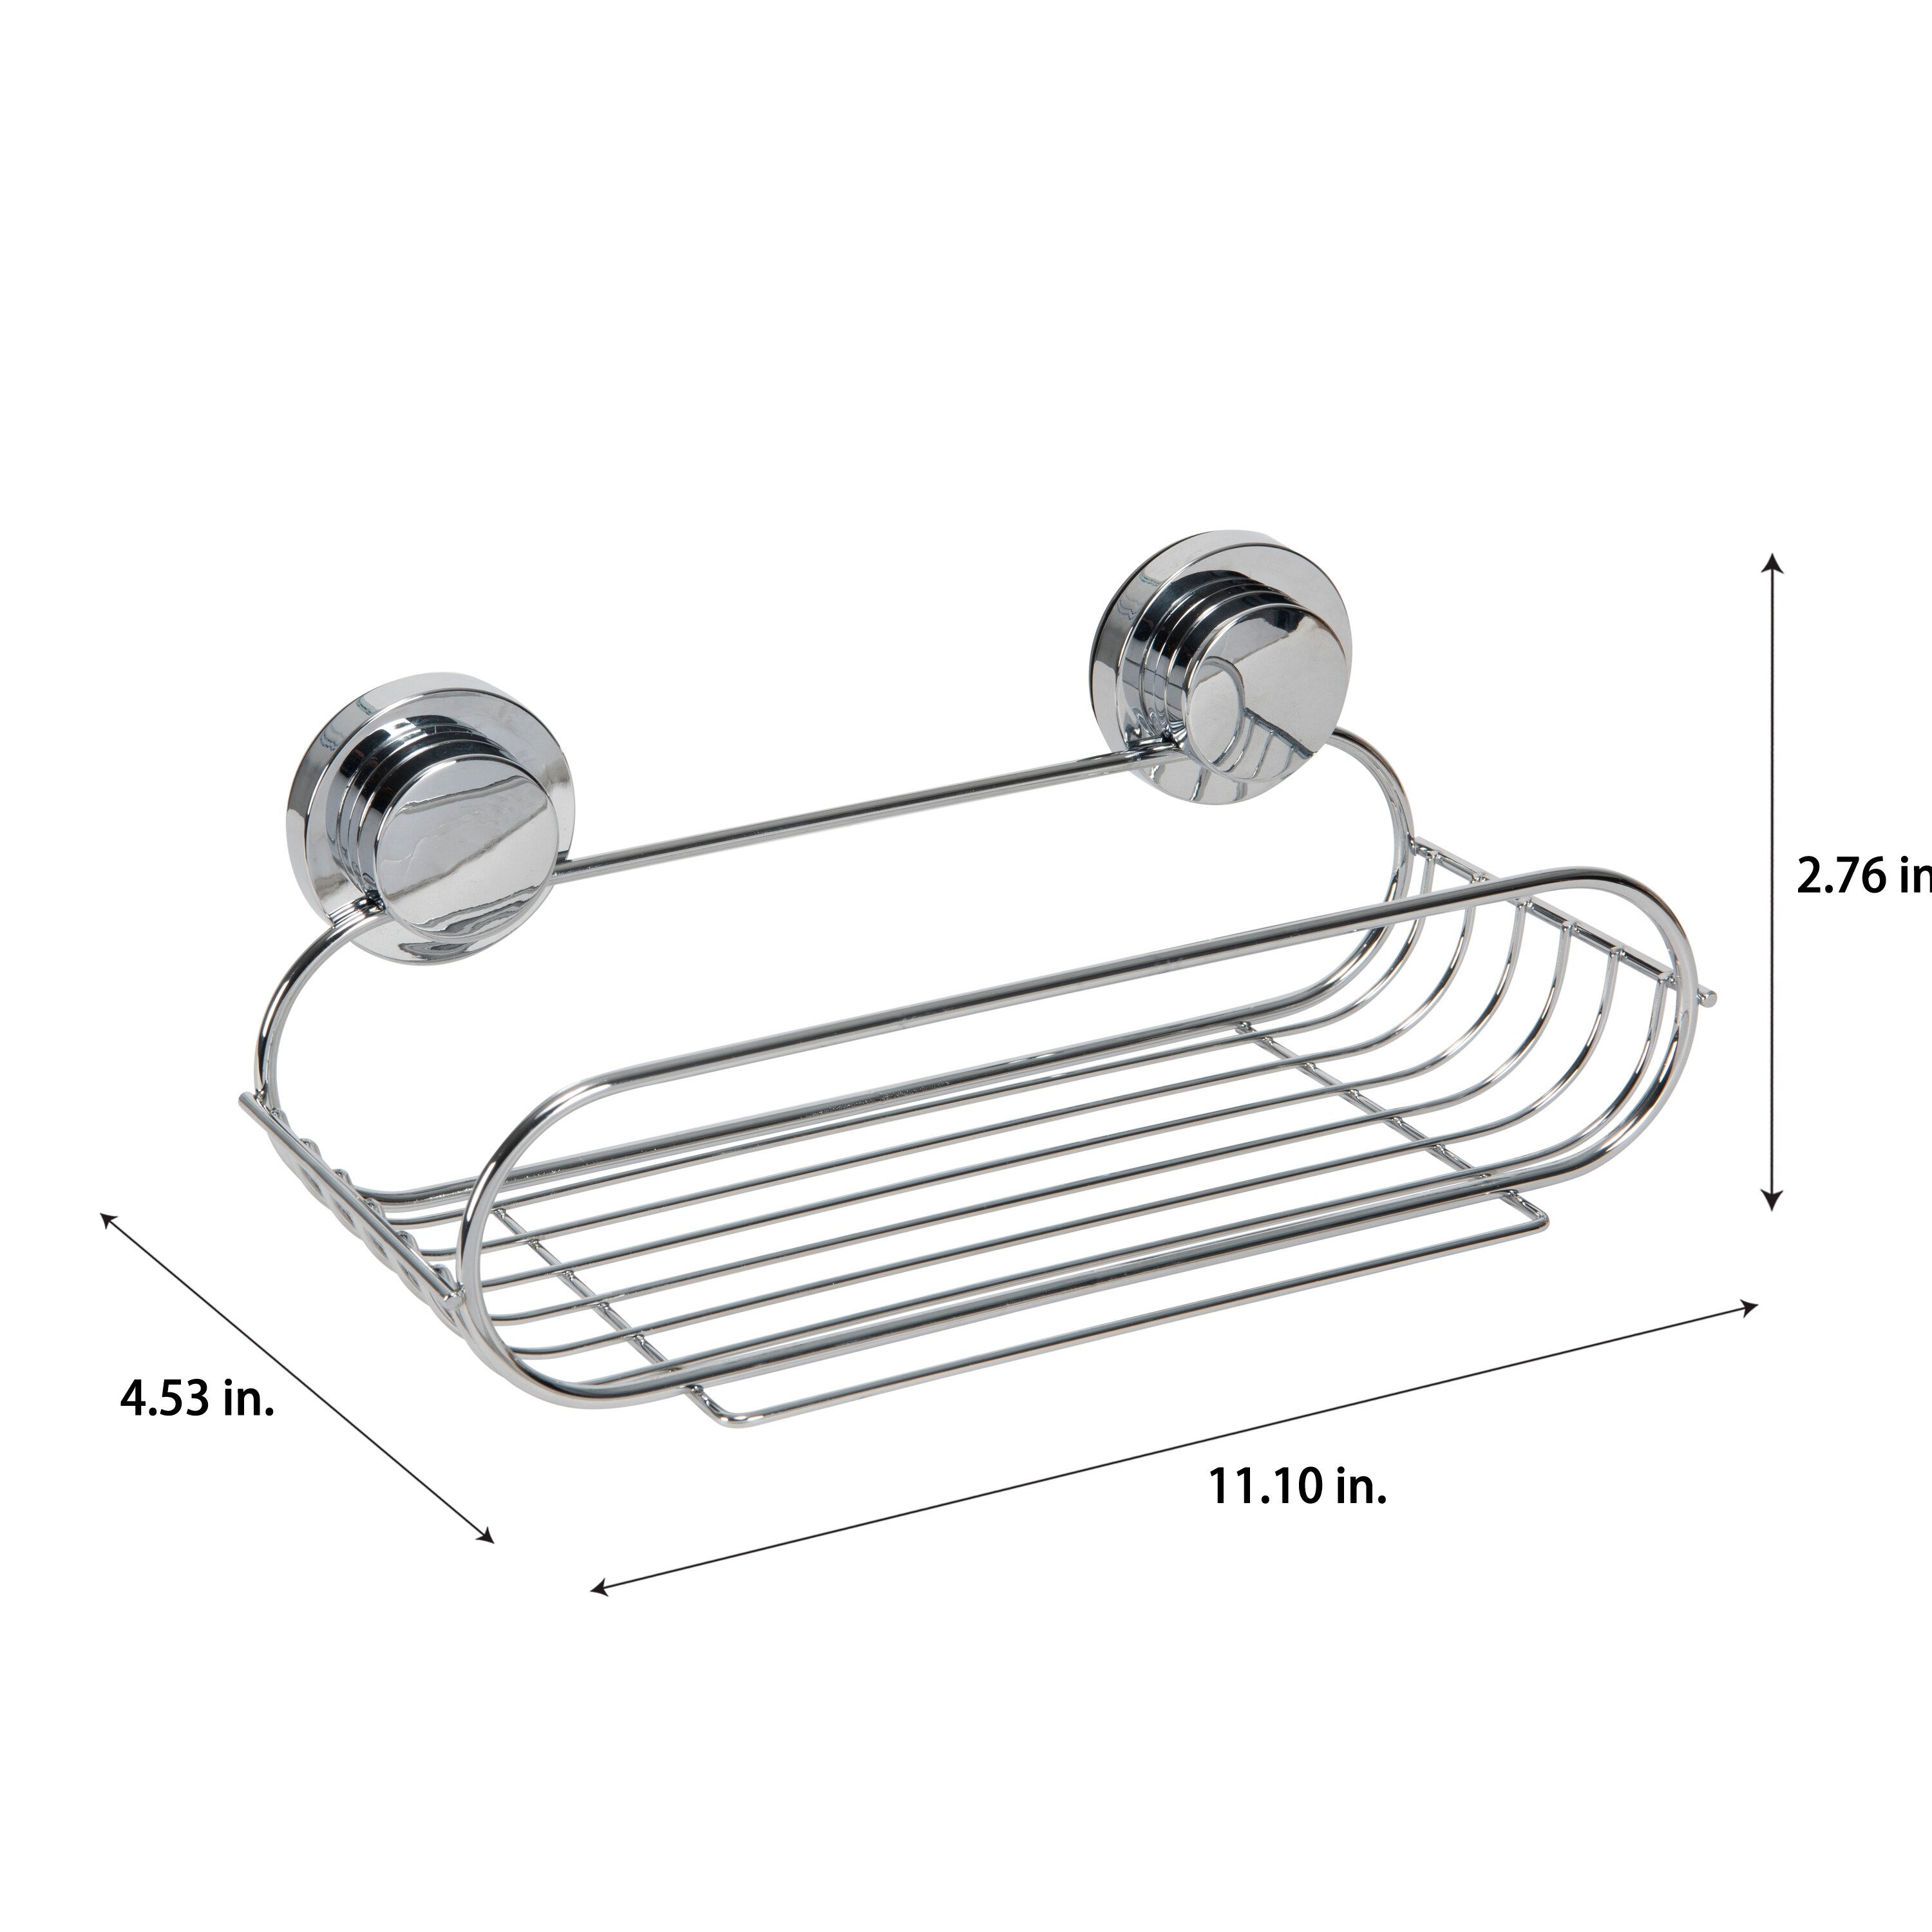 https://ak1.ostkcdn.com/images/products/is/images/direct/5bc7cc188d409d23ee2ddd432f748ab9c58f3db1/Bath-Bliss-Suction-Cup-Bathroom-Basket-in-Chrome.jpg